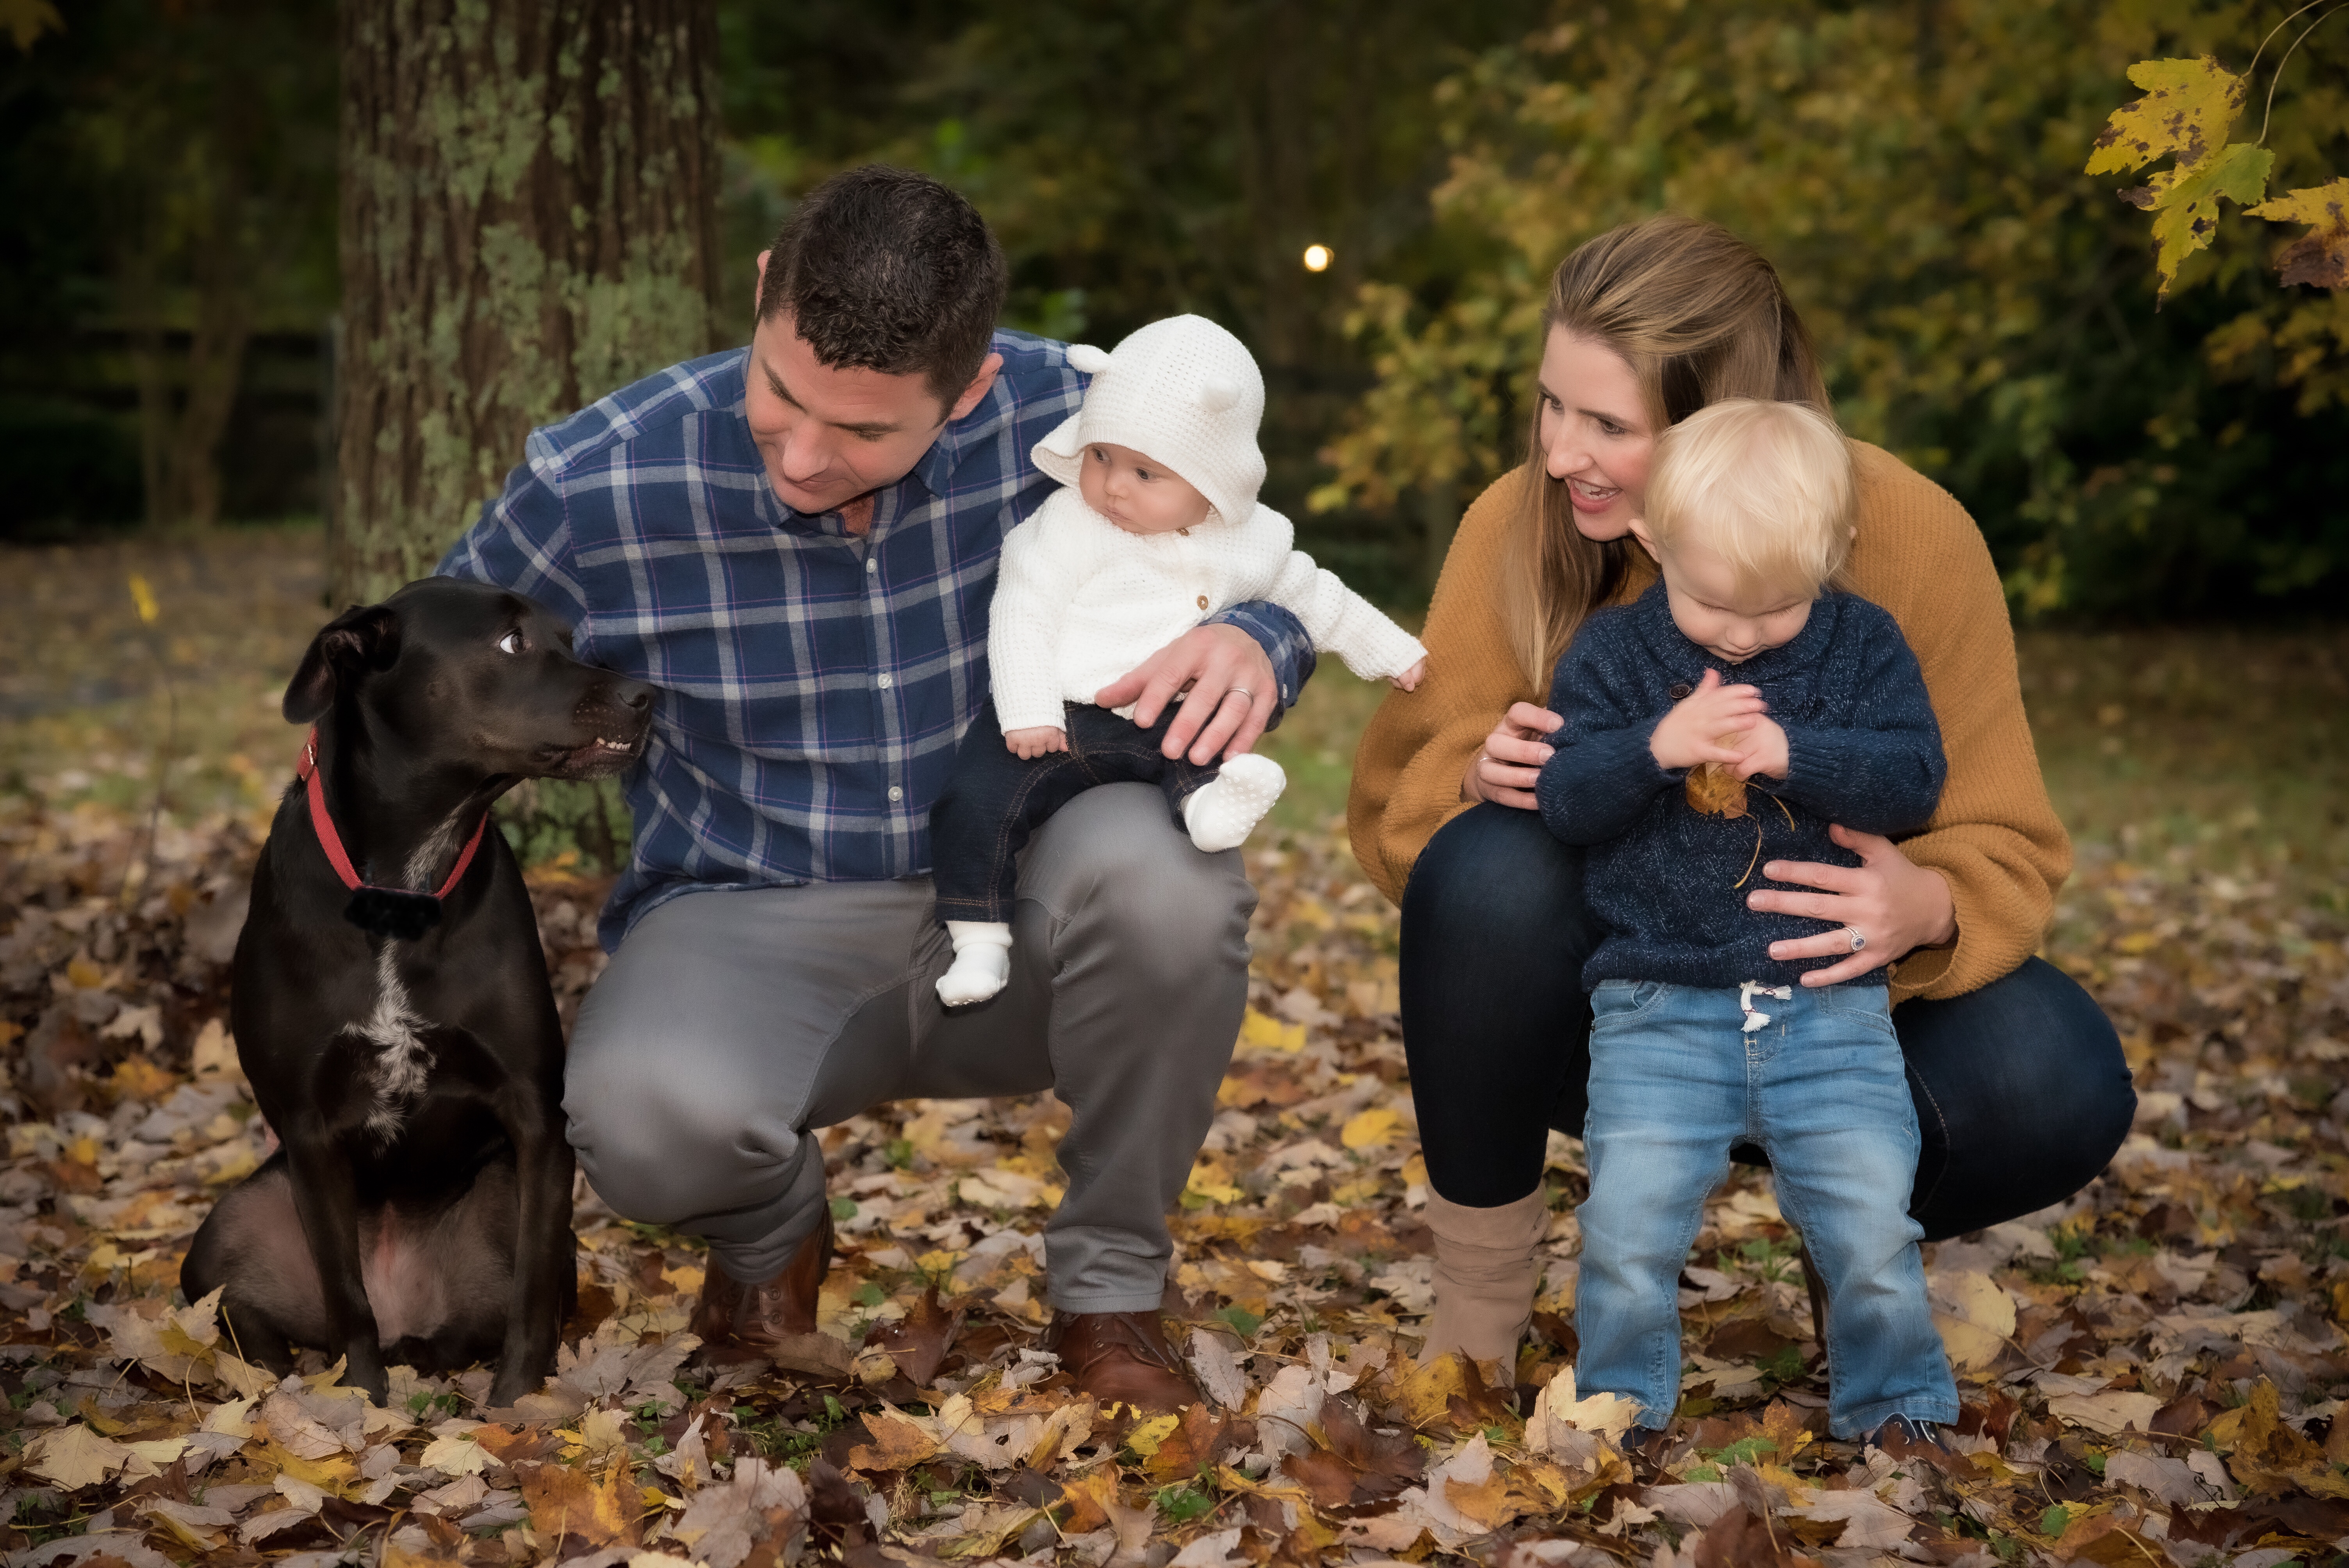 A family of two adults, two children and a dog are shown in a bed of yellow, Fall leaves. From left to right: black medium sized dog with red collar and white strip on her chest; a father wearing a blue plaid shirt and gray pants holding his baby daughter (4 months old) wearing a white hooded sweater, jeans and white socks; mother is crouched down wearing a gold sweater, blondish brown hair, jeans and short tan boots is behind her 2-year old son who has blond hair, wearing a blue cable sweater, light denim jeans and holding a leaf. The boy's head is down. The mother, father and baby look at the dog and he looks back.